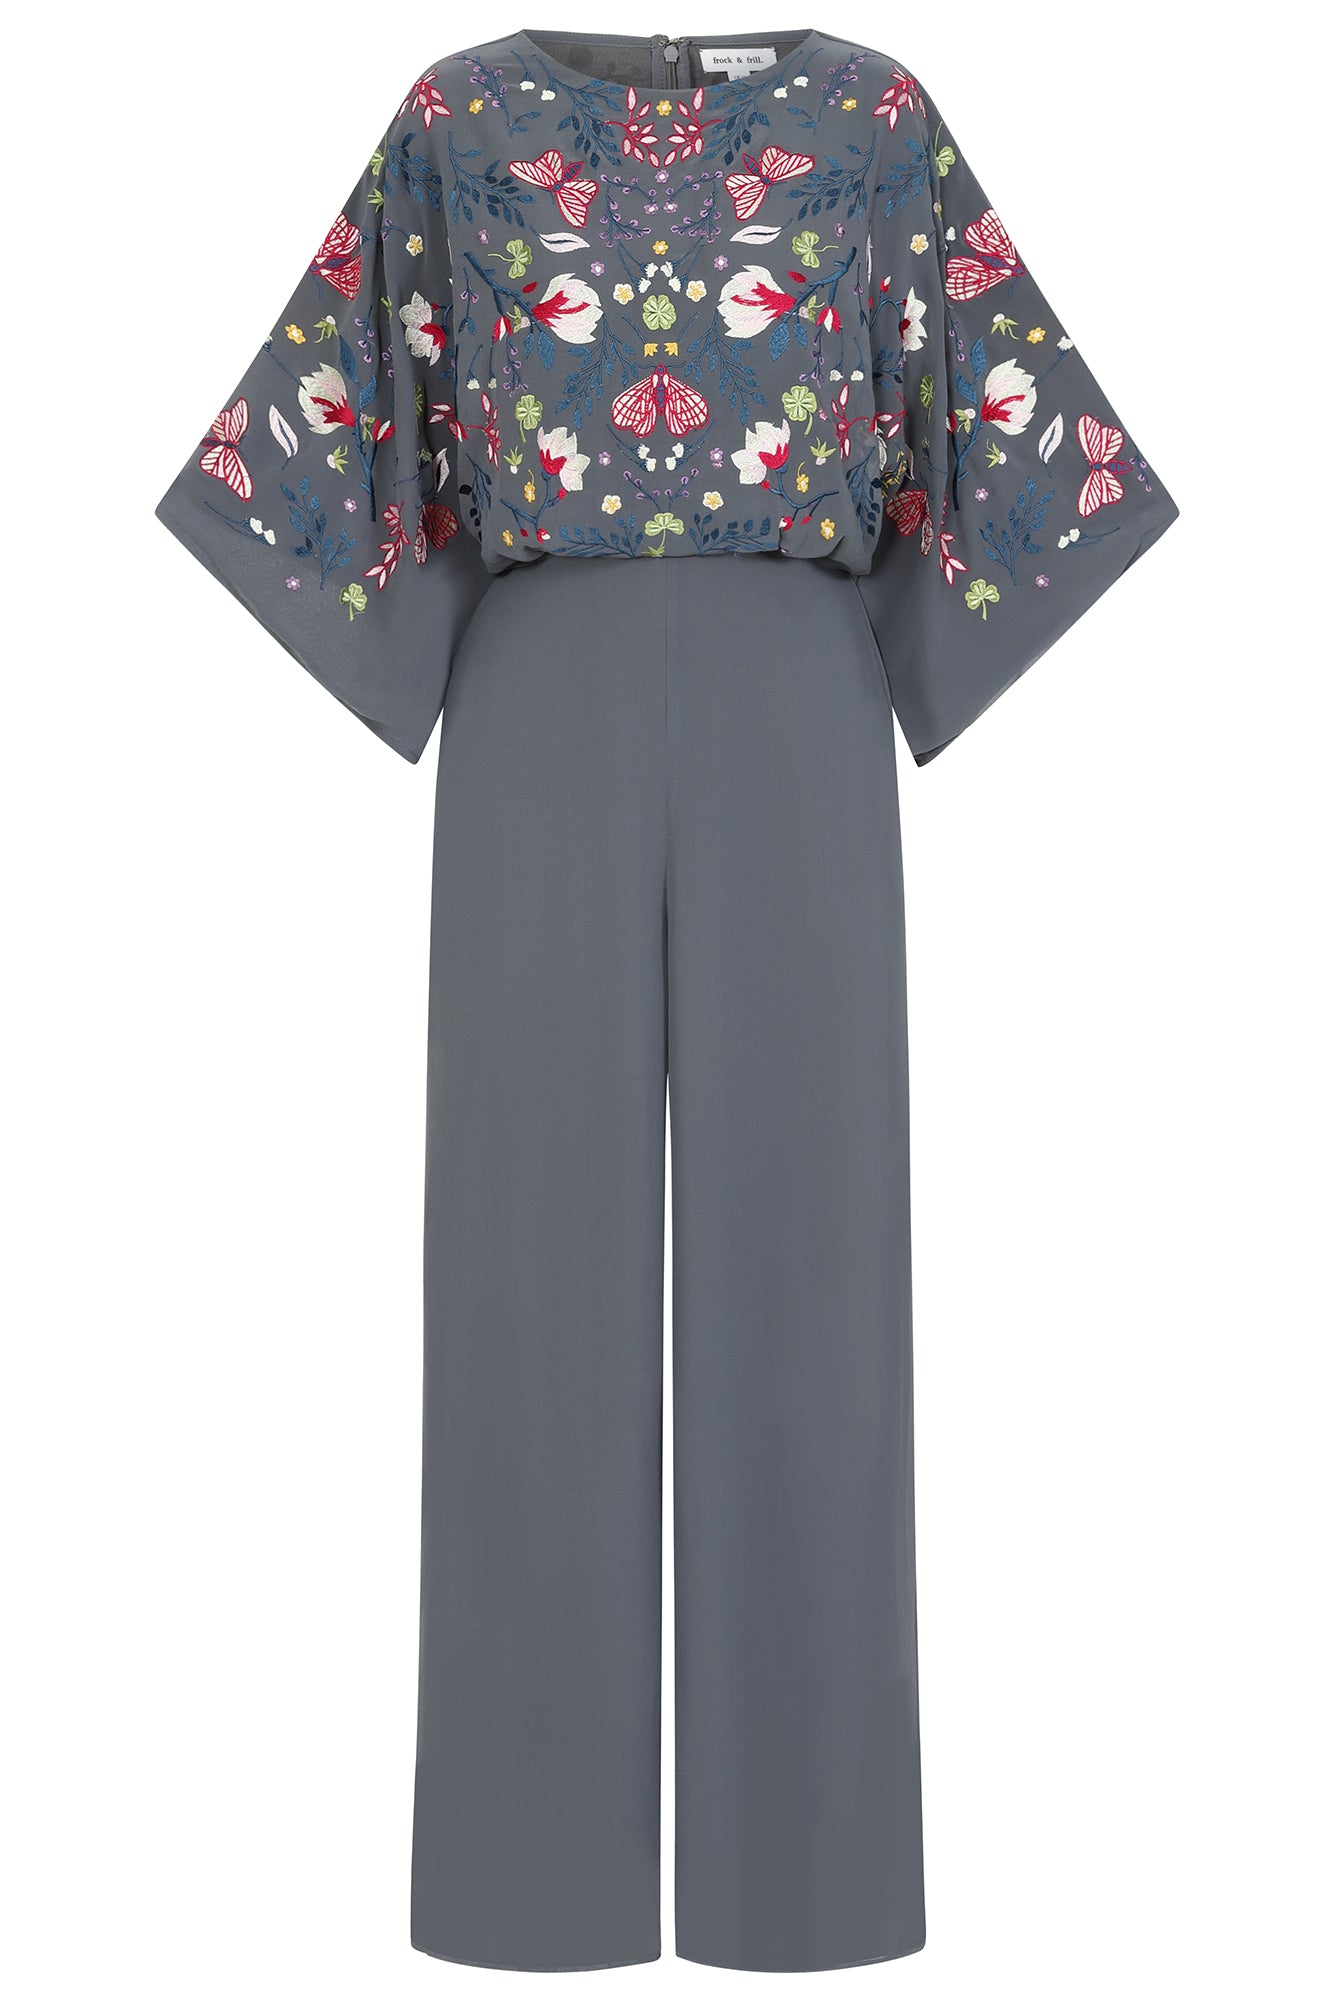 Women’s Grey Yareli Floral Embroidered Jumpsuit - Charcoal Extra Small Frock and Frill